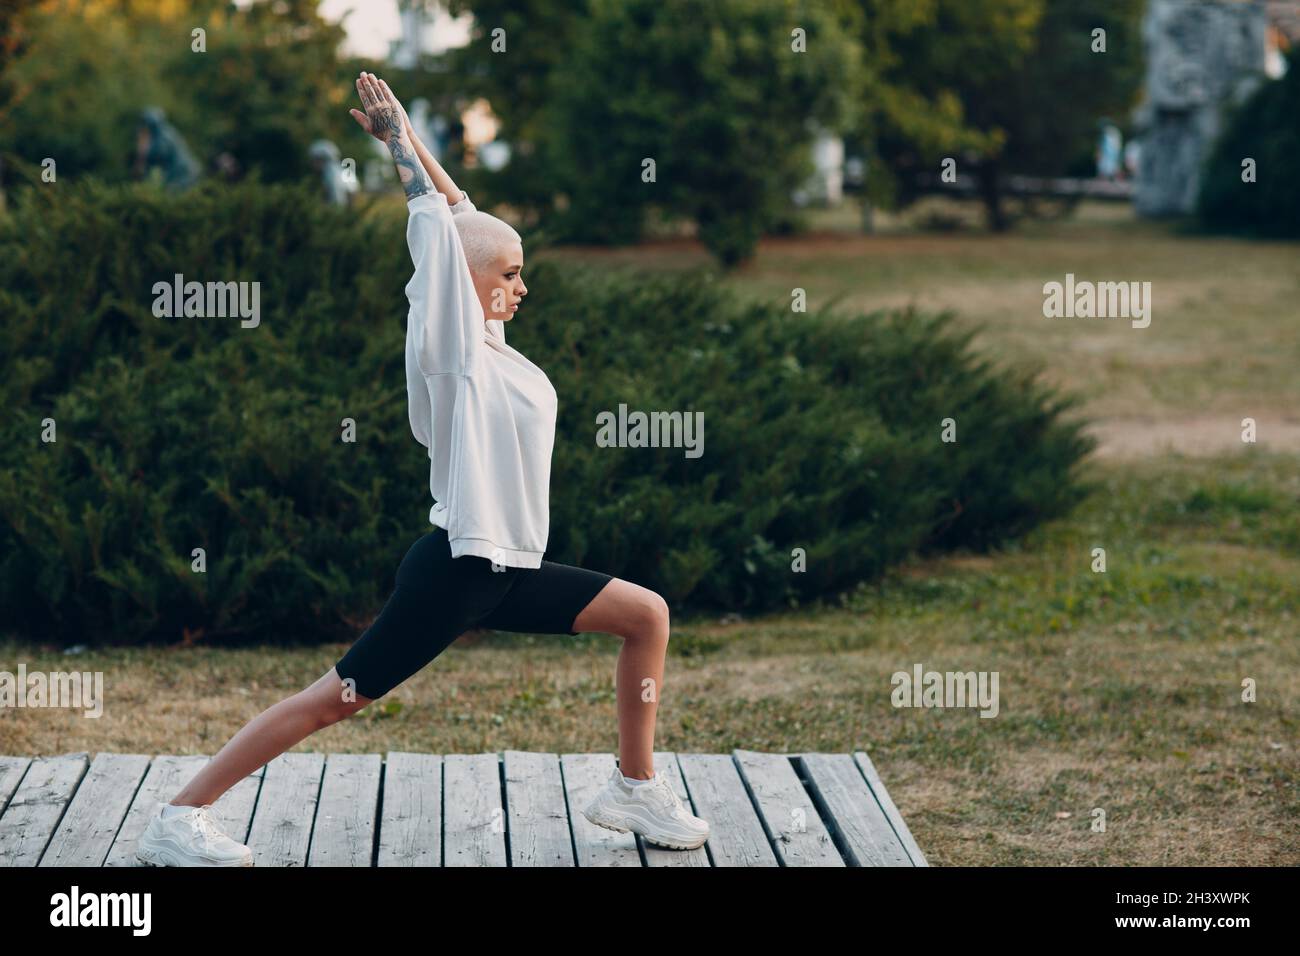 Millenial young woman blonde short hair doing yoga outdoor Stock Photo